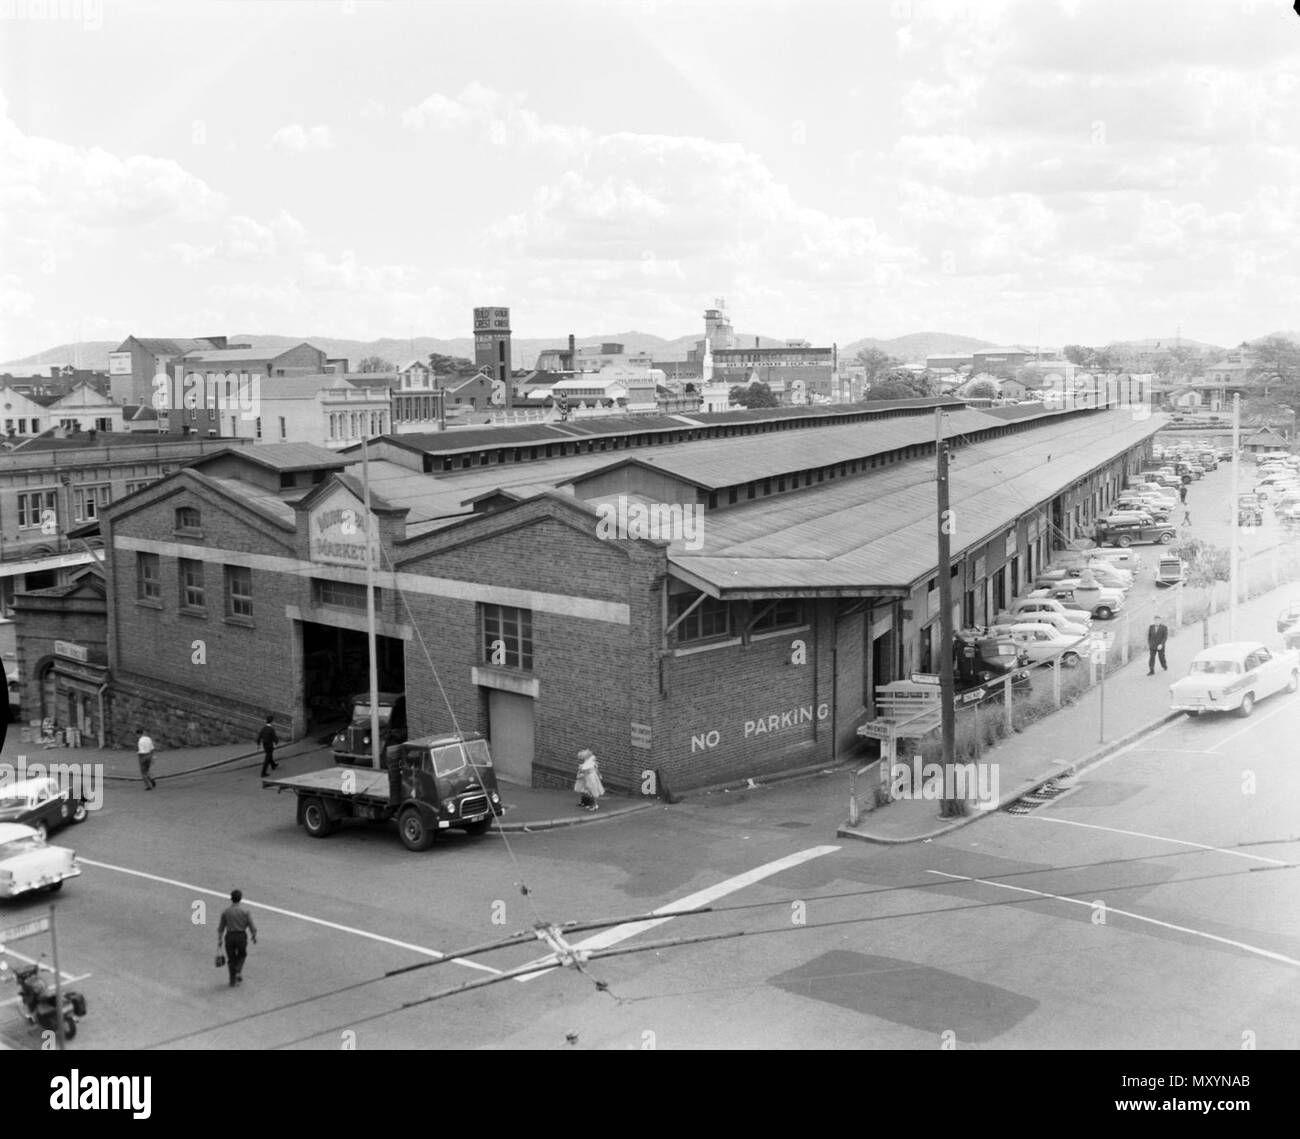 Municipal Markets, Brisbane, 1962. Brisbane’s first Central Market began in 1868 in a Brisbane Municipal Council built shed on the corner of Charlotte and Eagle Streets. It closed in 1881 due to poor patronage.  In 1885, the Council opened the purpose-built Municipal Market in Roma Street, beside the railway station.  Due to increasing congestion, the State Government agreed to move the Central Market to Rocklea in 1964, were the Brisbane Markets are located today. Stock Photo